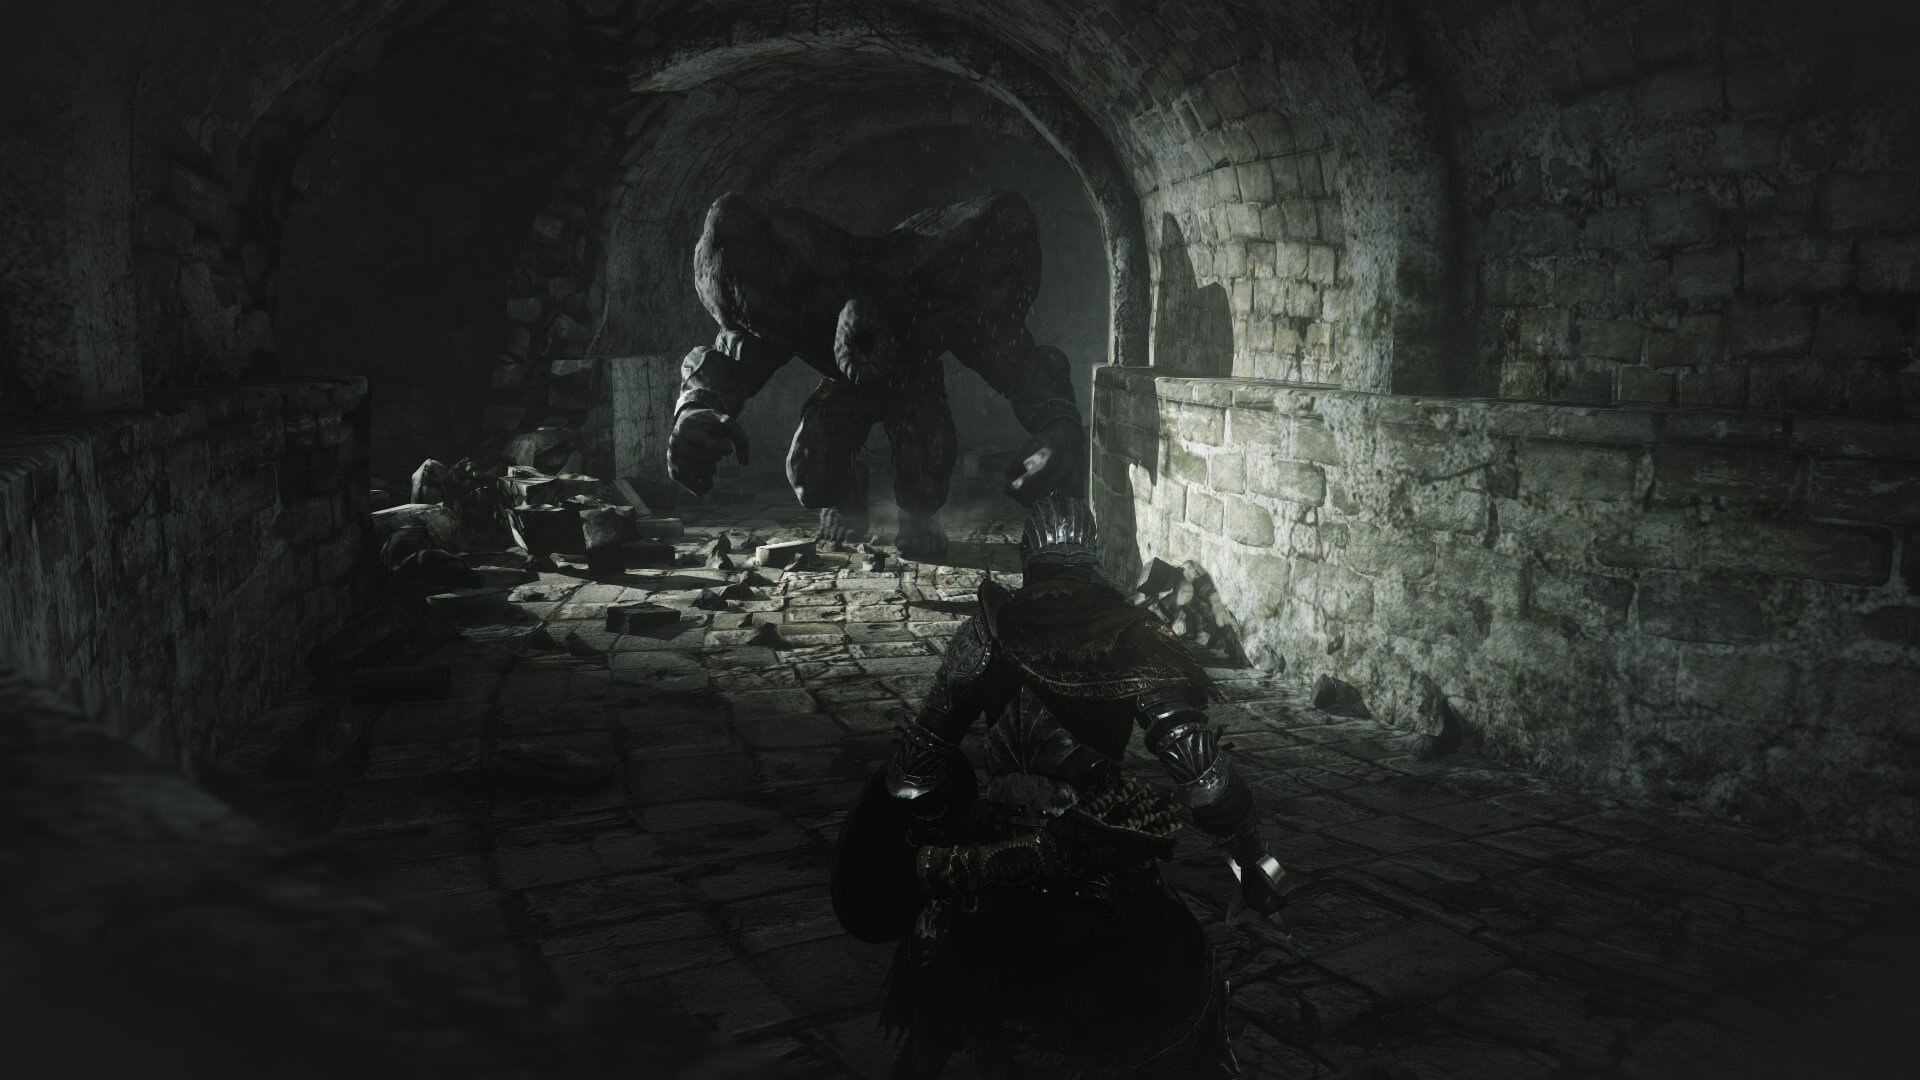 Dark Souls 2 “Flames of Old” Lighting Mod Receives Another